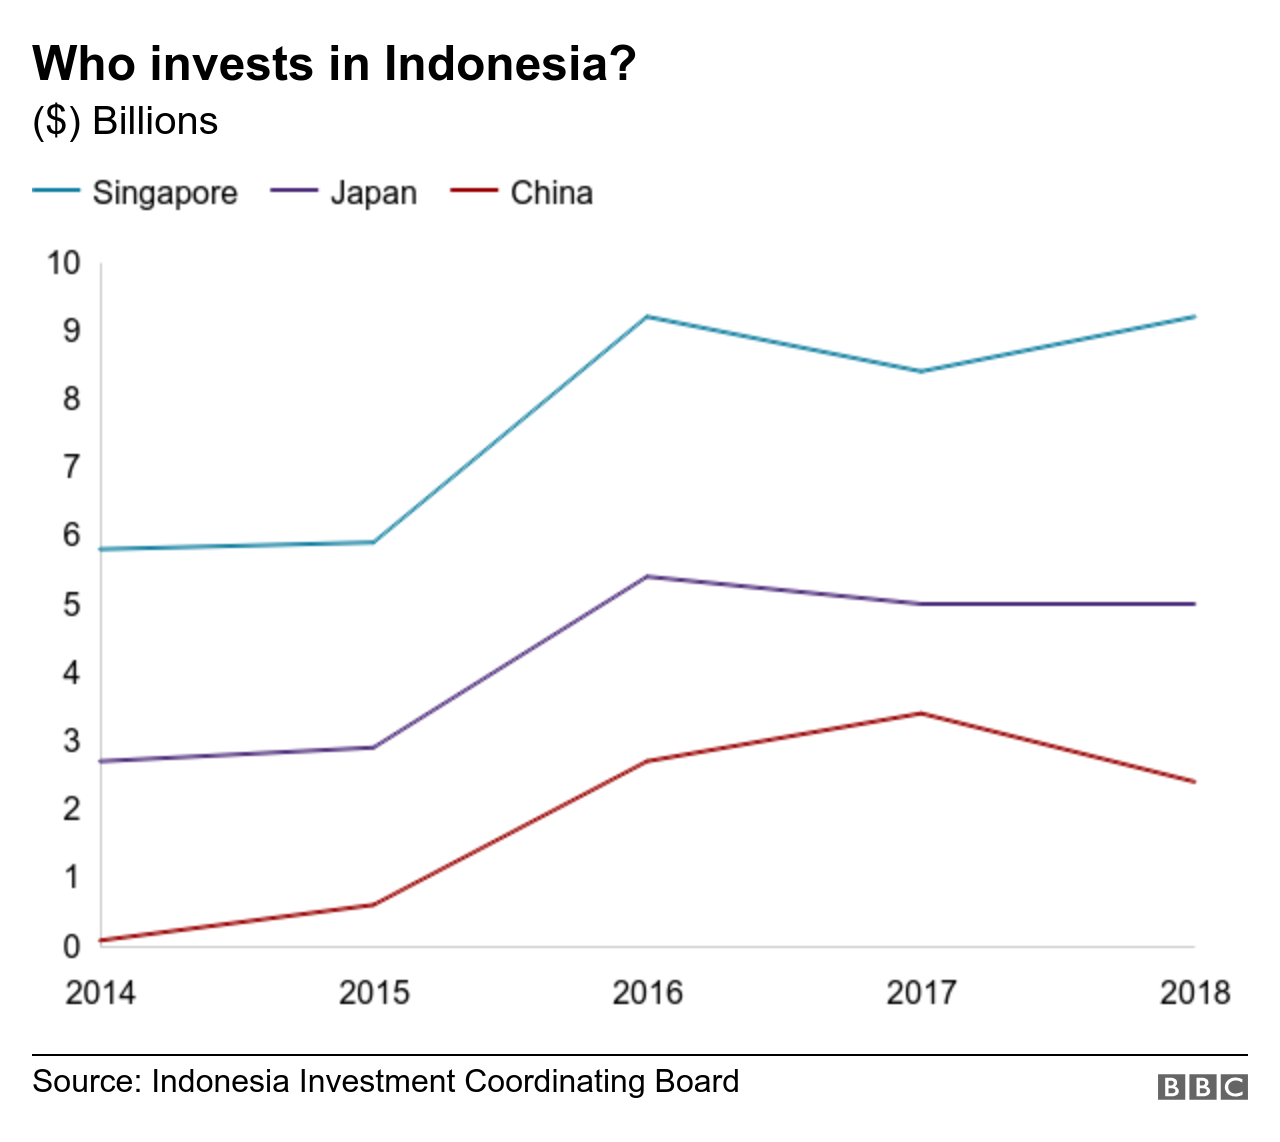 Chart shows investment in Indonesia from Singapore, Japan and China